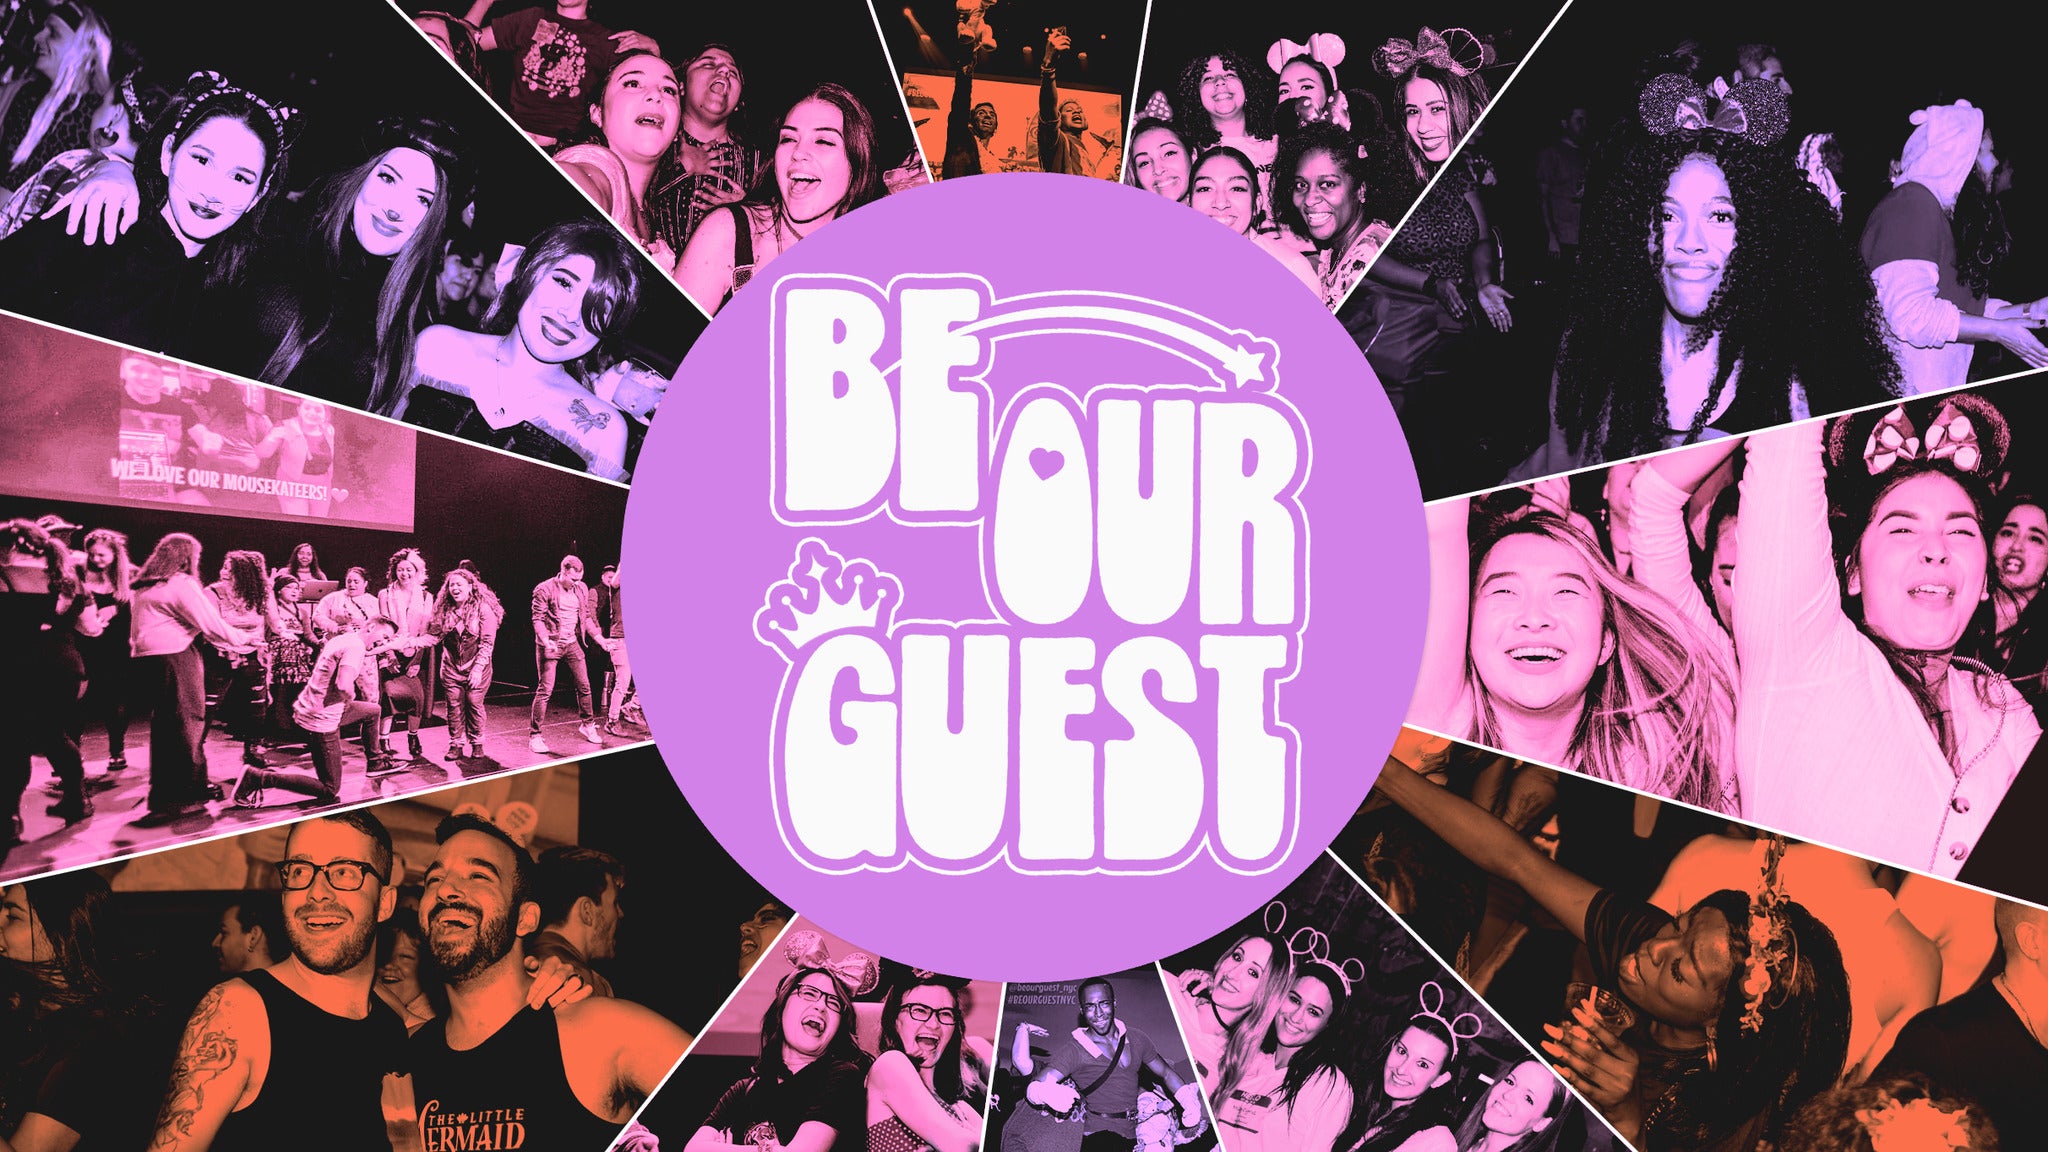 presale code for Be Our Guest: The Disney DJ Night (event is 21+) affordable tickets in Louisville at Mercury Ballroom